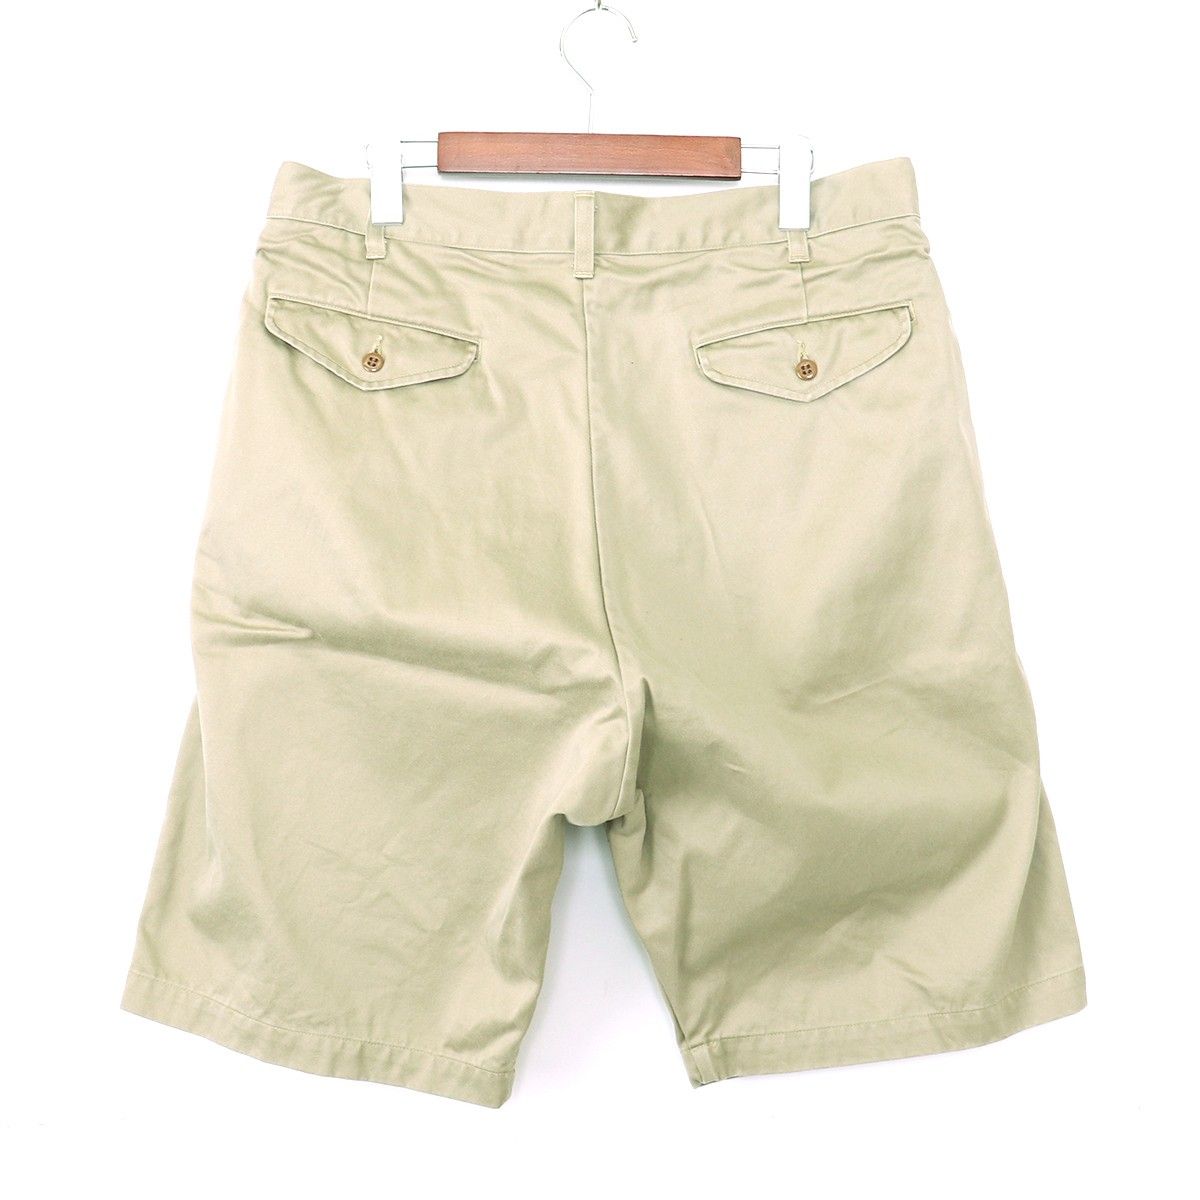 GOLD WEAPON 2TUCK SHORTS | www.isi.edu.pa